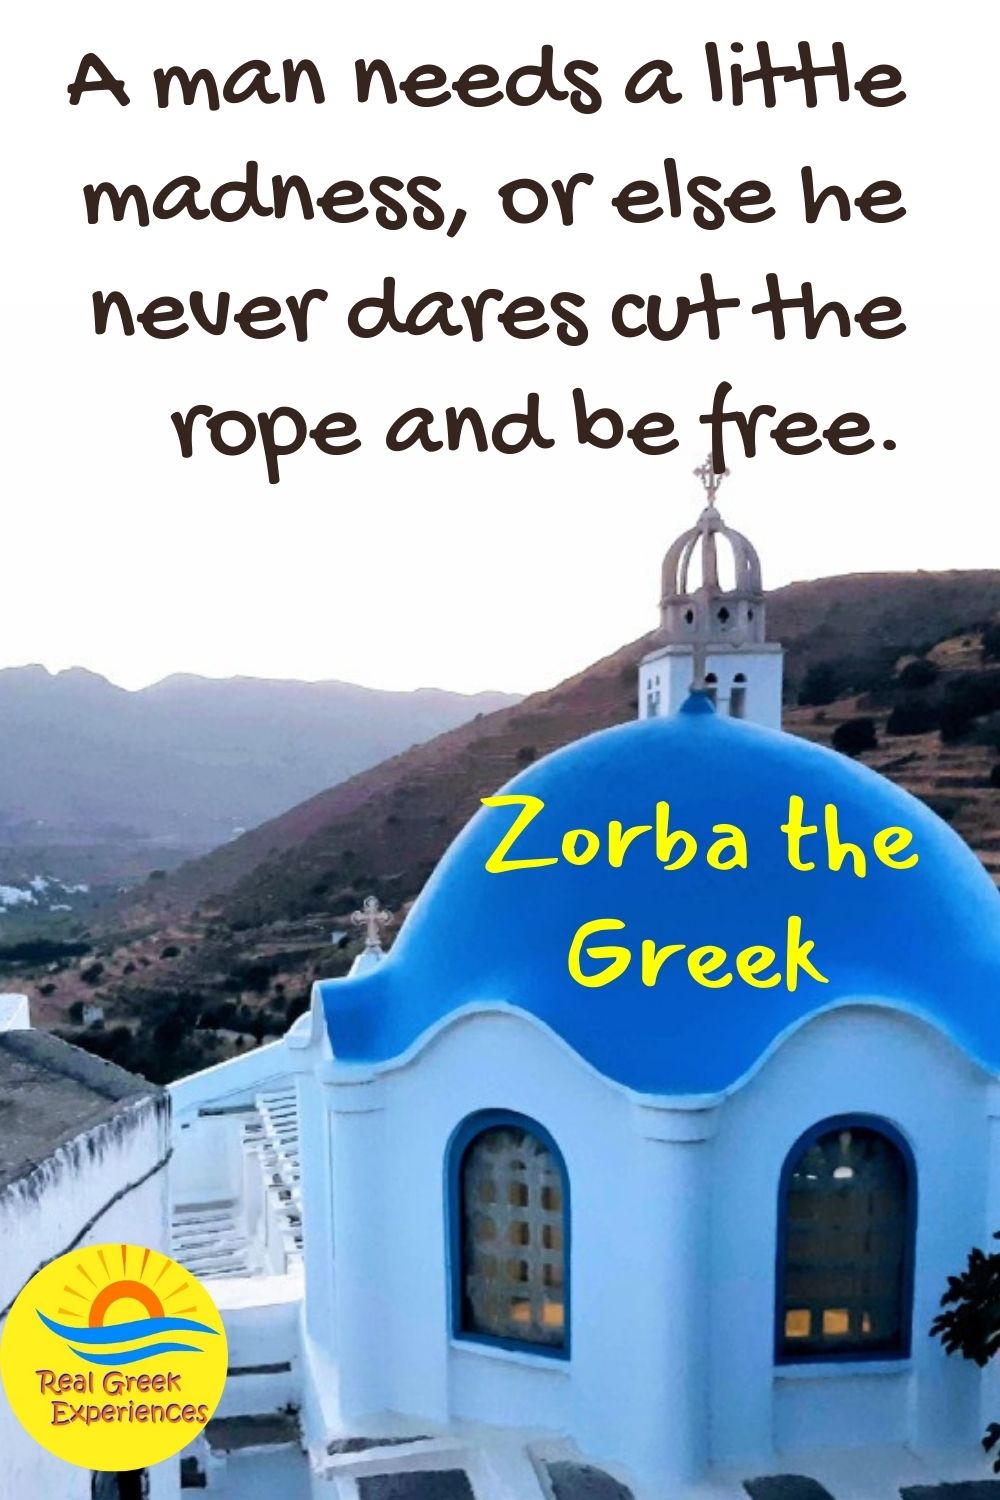 Greece quotes - A man needs a little madness, or else he never dares cut the rope and be free - Nikos Kazantzakis